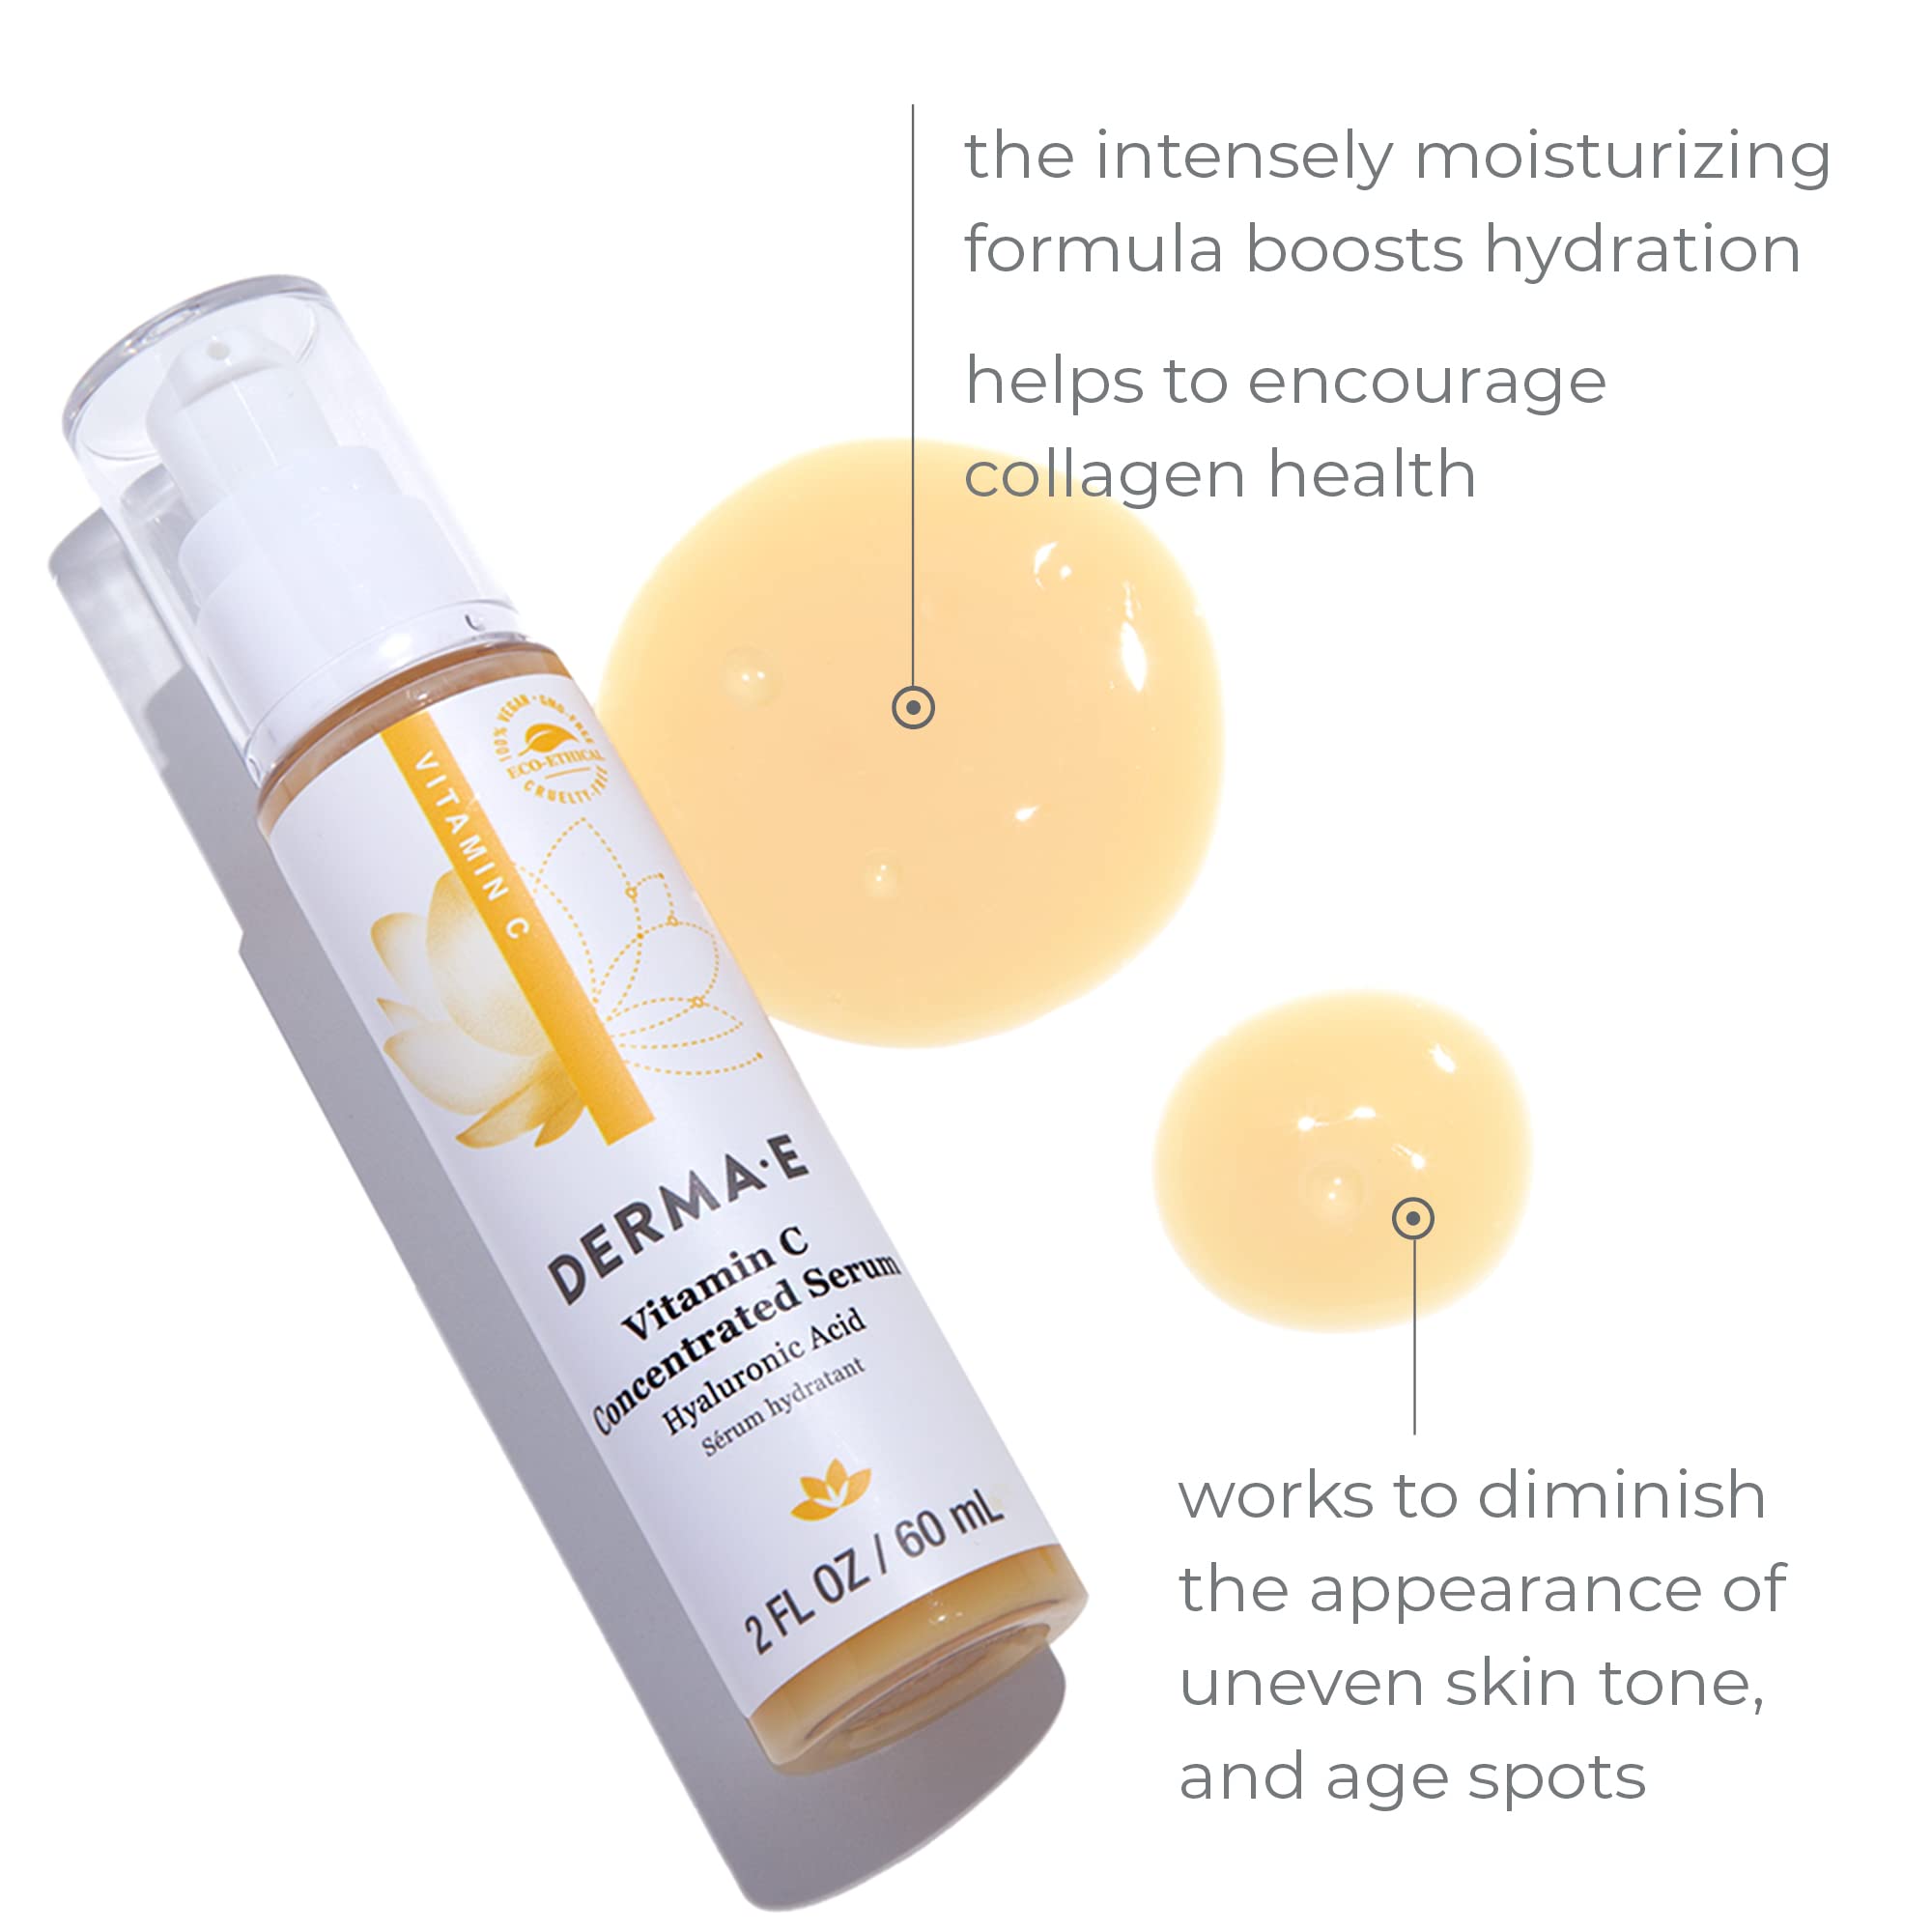 DERMA E Vitamin C Concentrated Serum with Hyaluronic Acid – All Natural, Antioxidant-Rich Concentrated Facial Serum – Firming and Brightening Skin Serum, 2oz